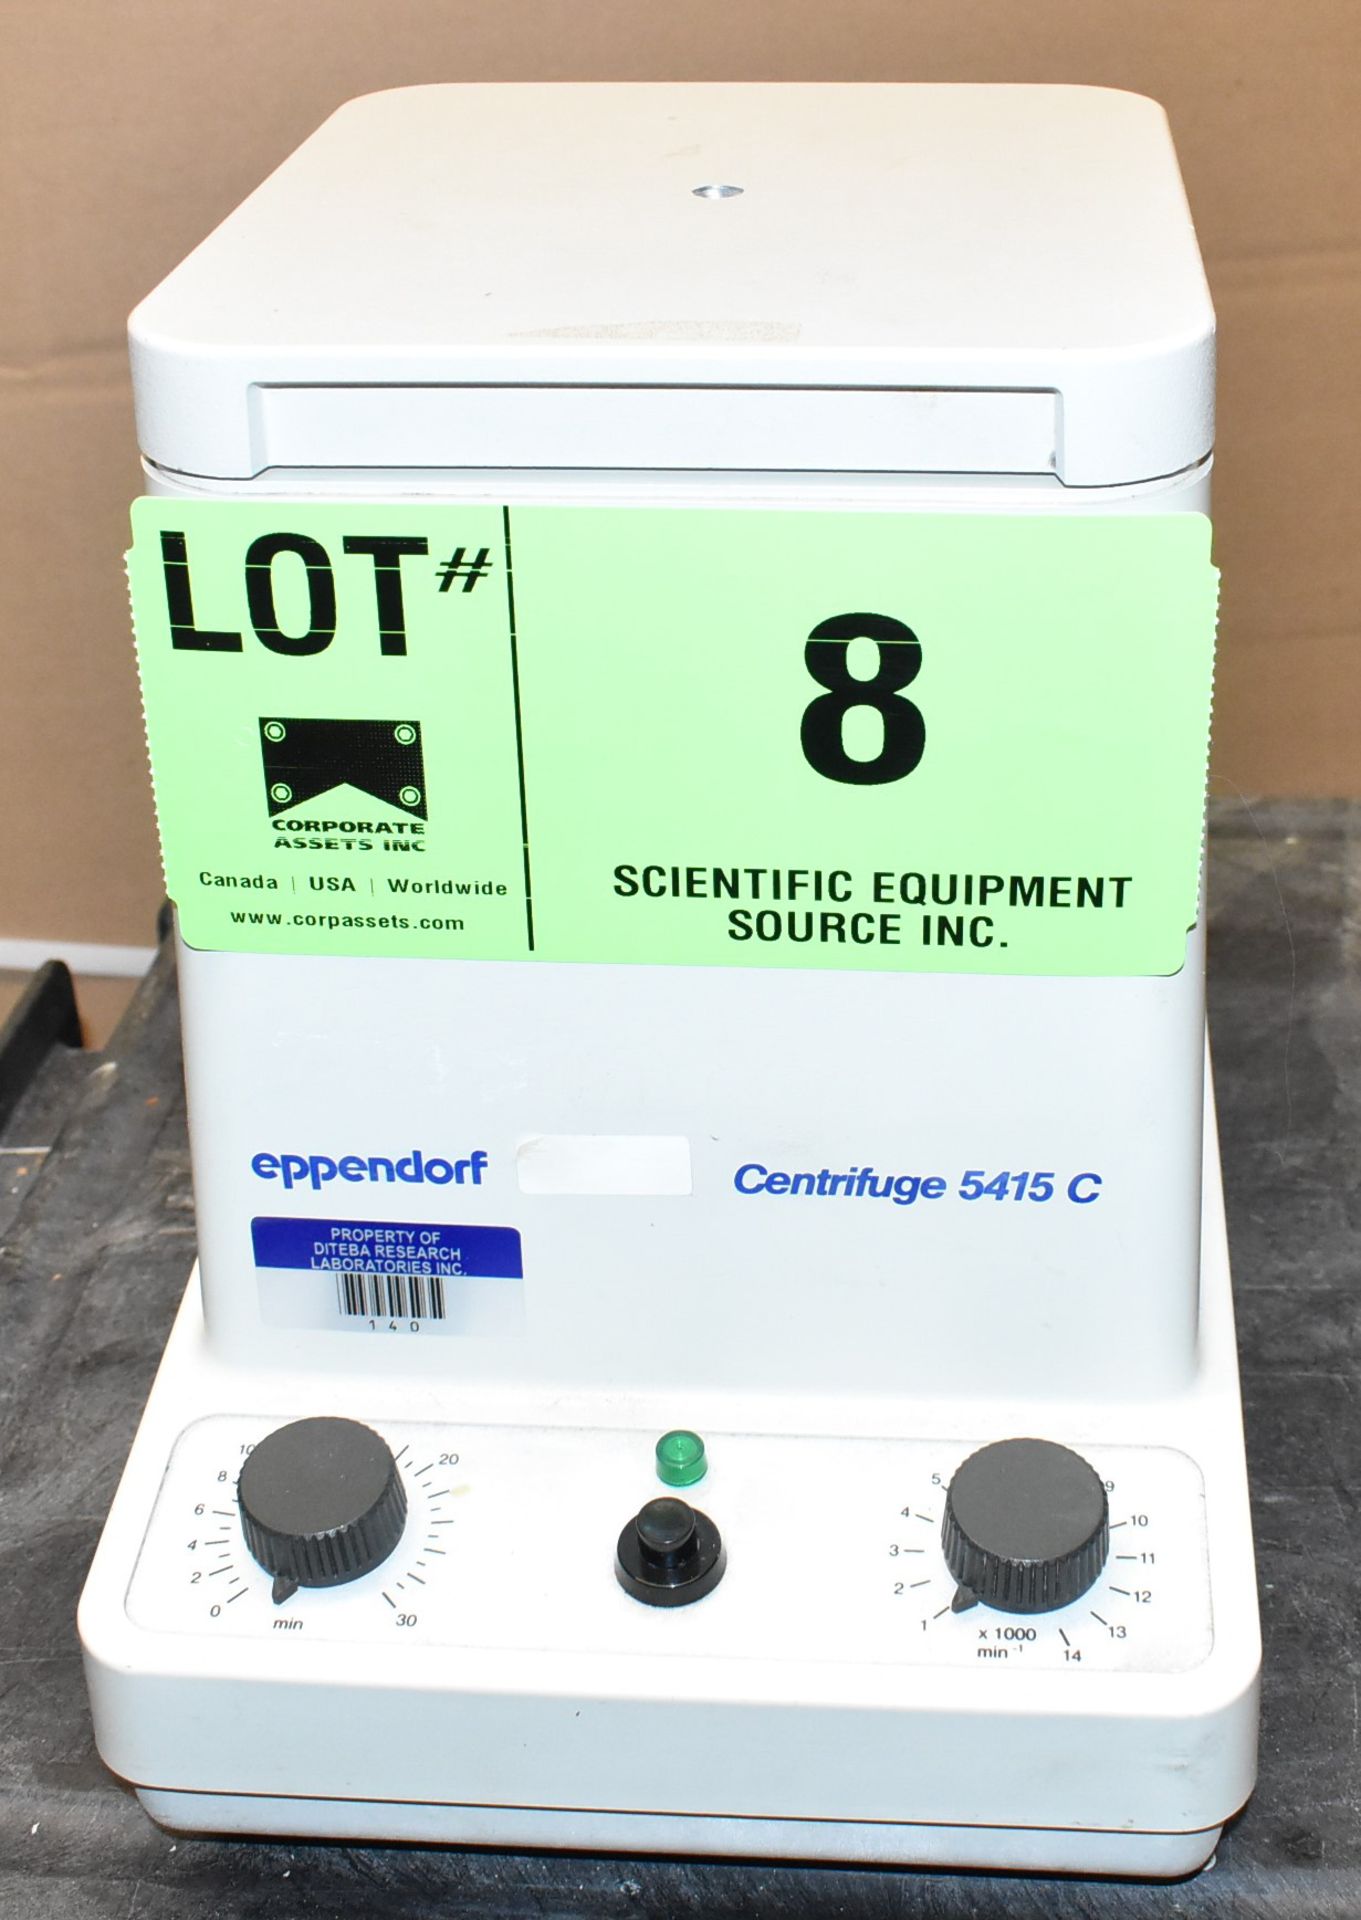 EPPENDORF 5415C BENCHTOP ROTARY MICRO-CENTRIFUGE WITH VARIABLE SPEEDS UP TO 14,000 RPM, 18X1.5ML